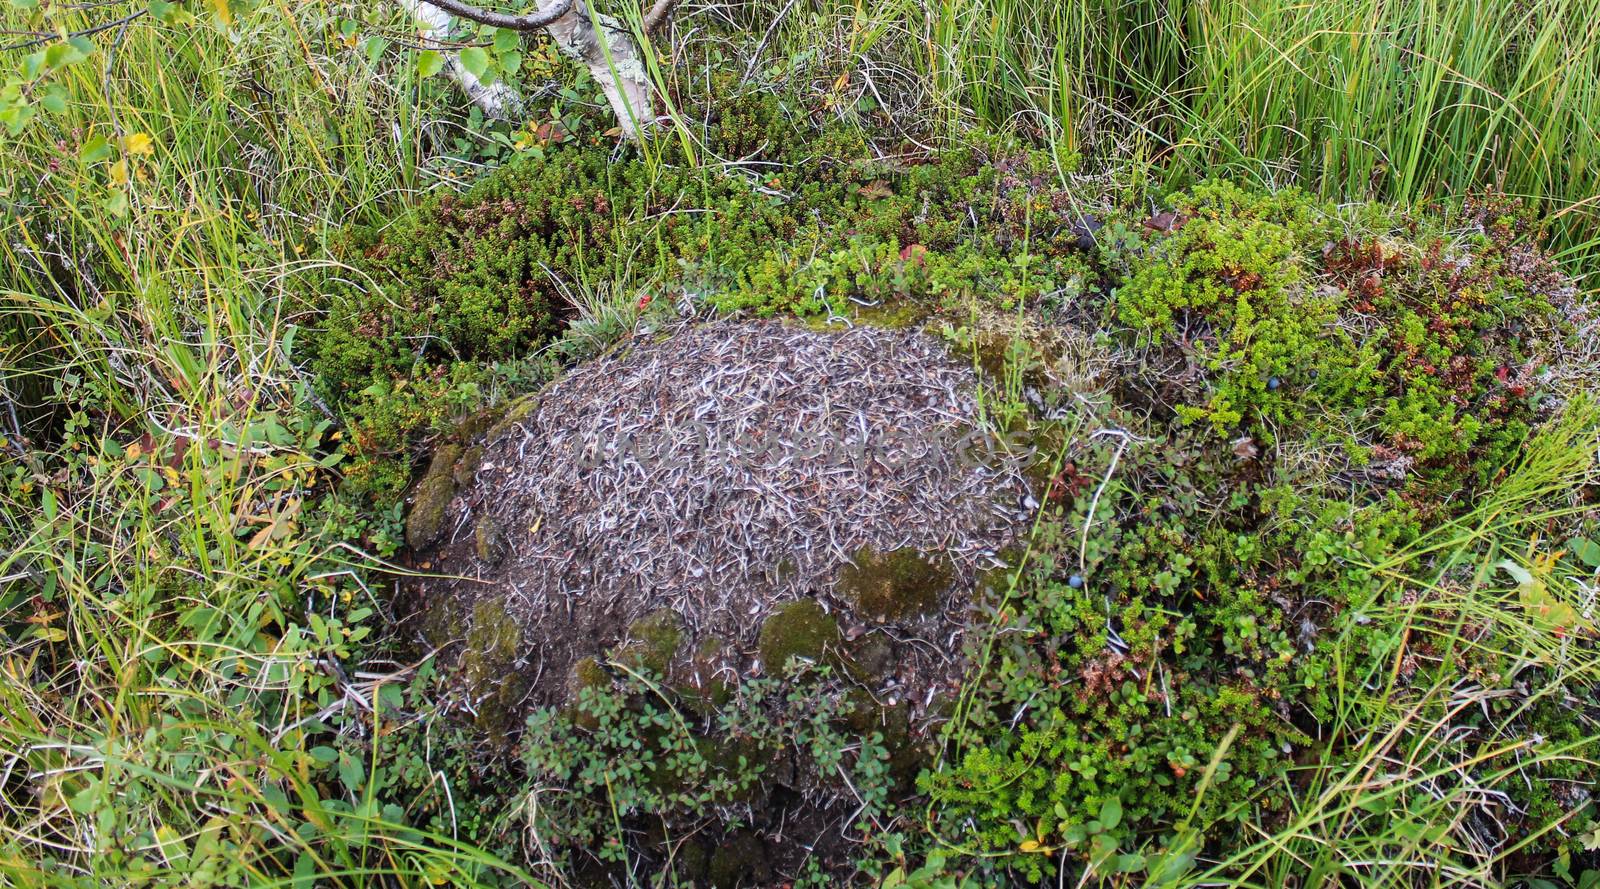 Close up of Ant mounds of the formica lugubris in the arctic tundra, northern Sweden